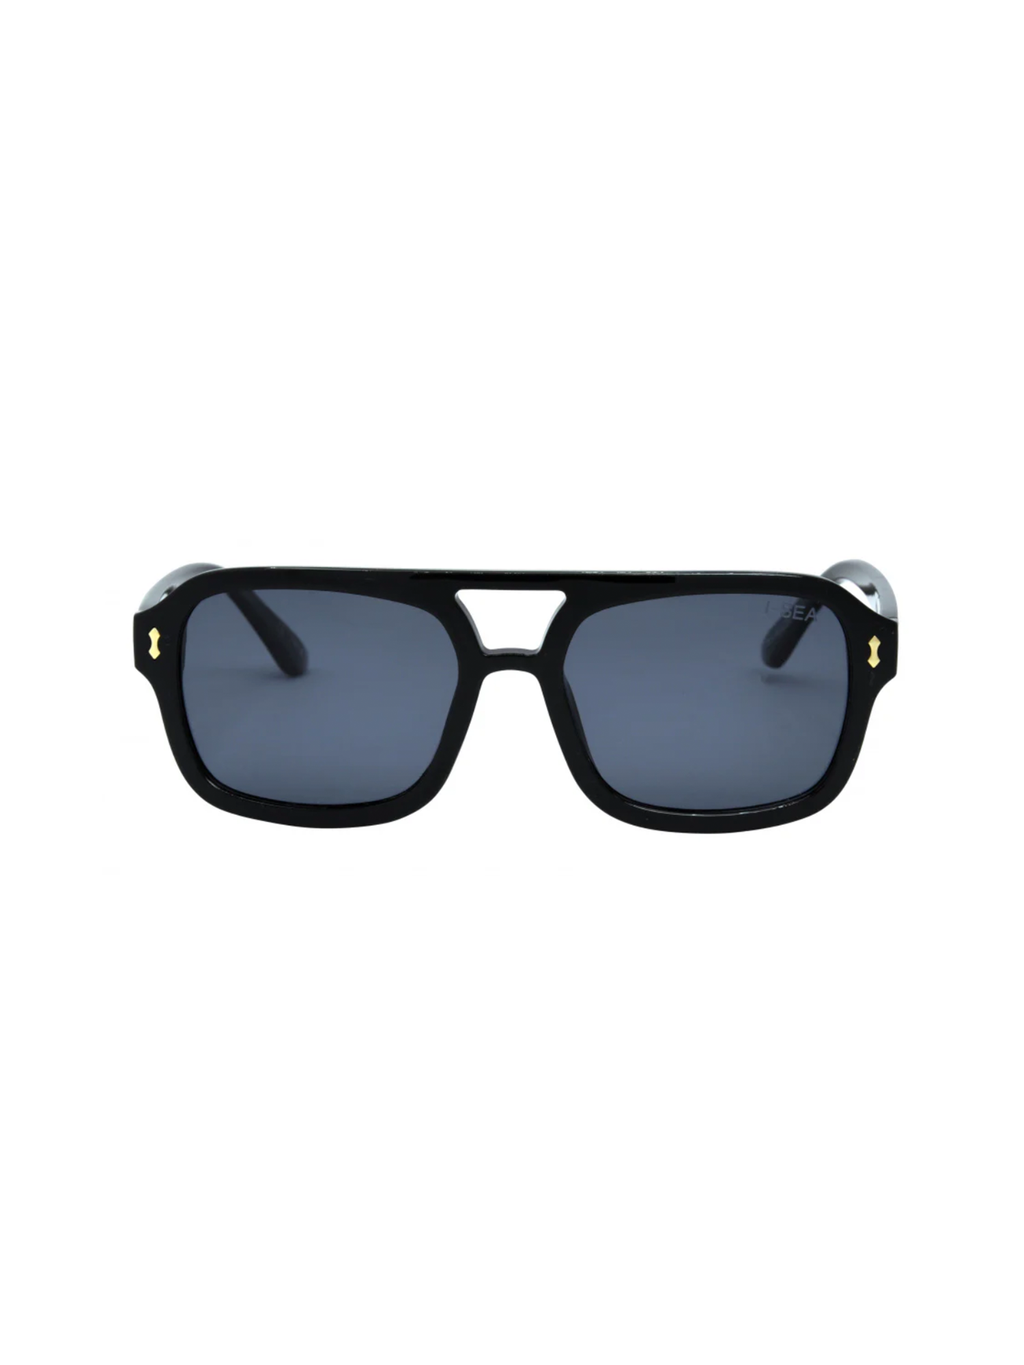 Royal Sunnies in Black/Smoke - Stitch And Feather